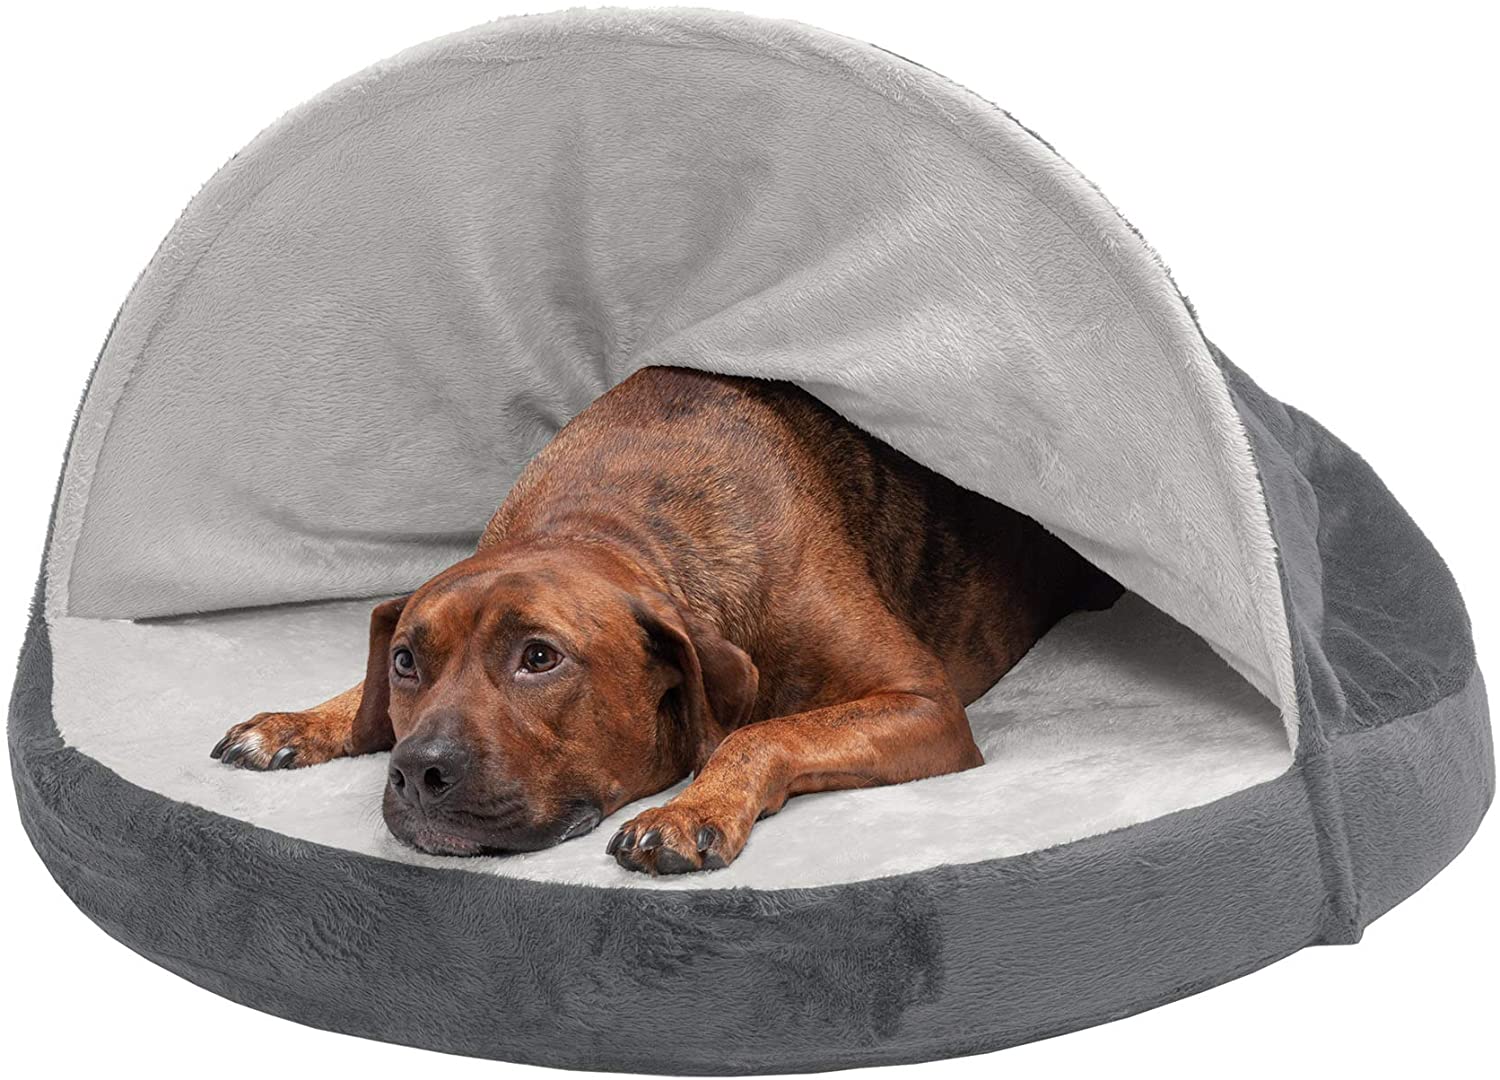 Photo 1 of Furhaven Round Pet Beds  Snuggery Dog Bed with Attached Blanket Hooded Donut Bolster Bed and More
ColorMicrovelvet Silver
Size35 inch Pack of 1
StyleSnuggery Memory Foam